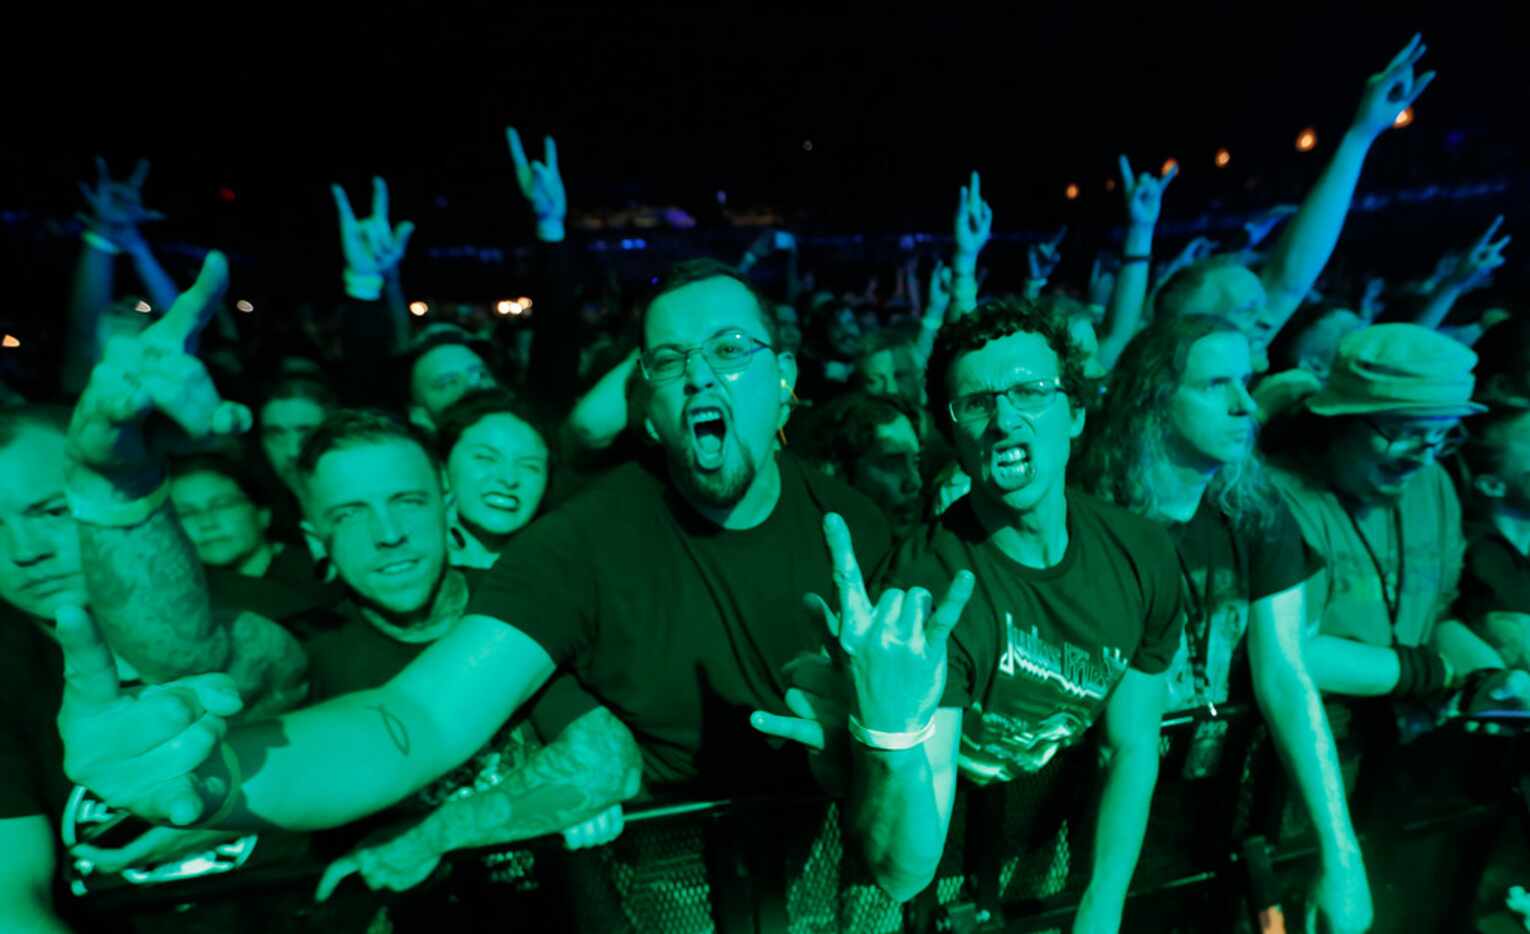 Lamb of God fans get into the music as the band performs in concert at the Bomb Factory in...